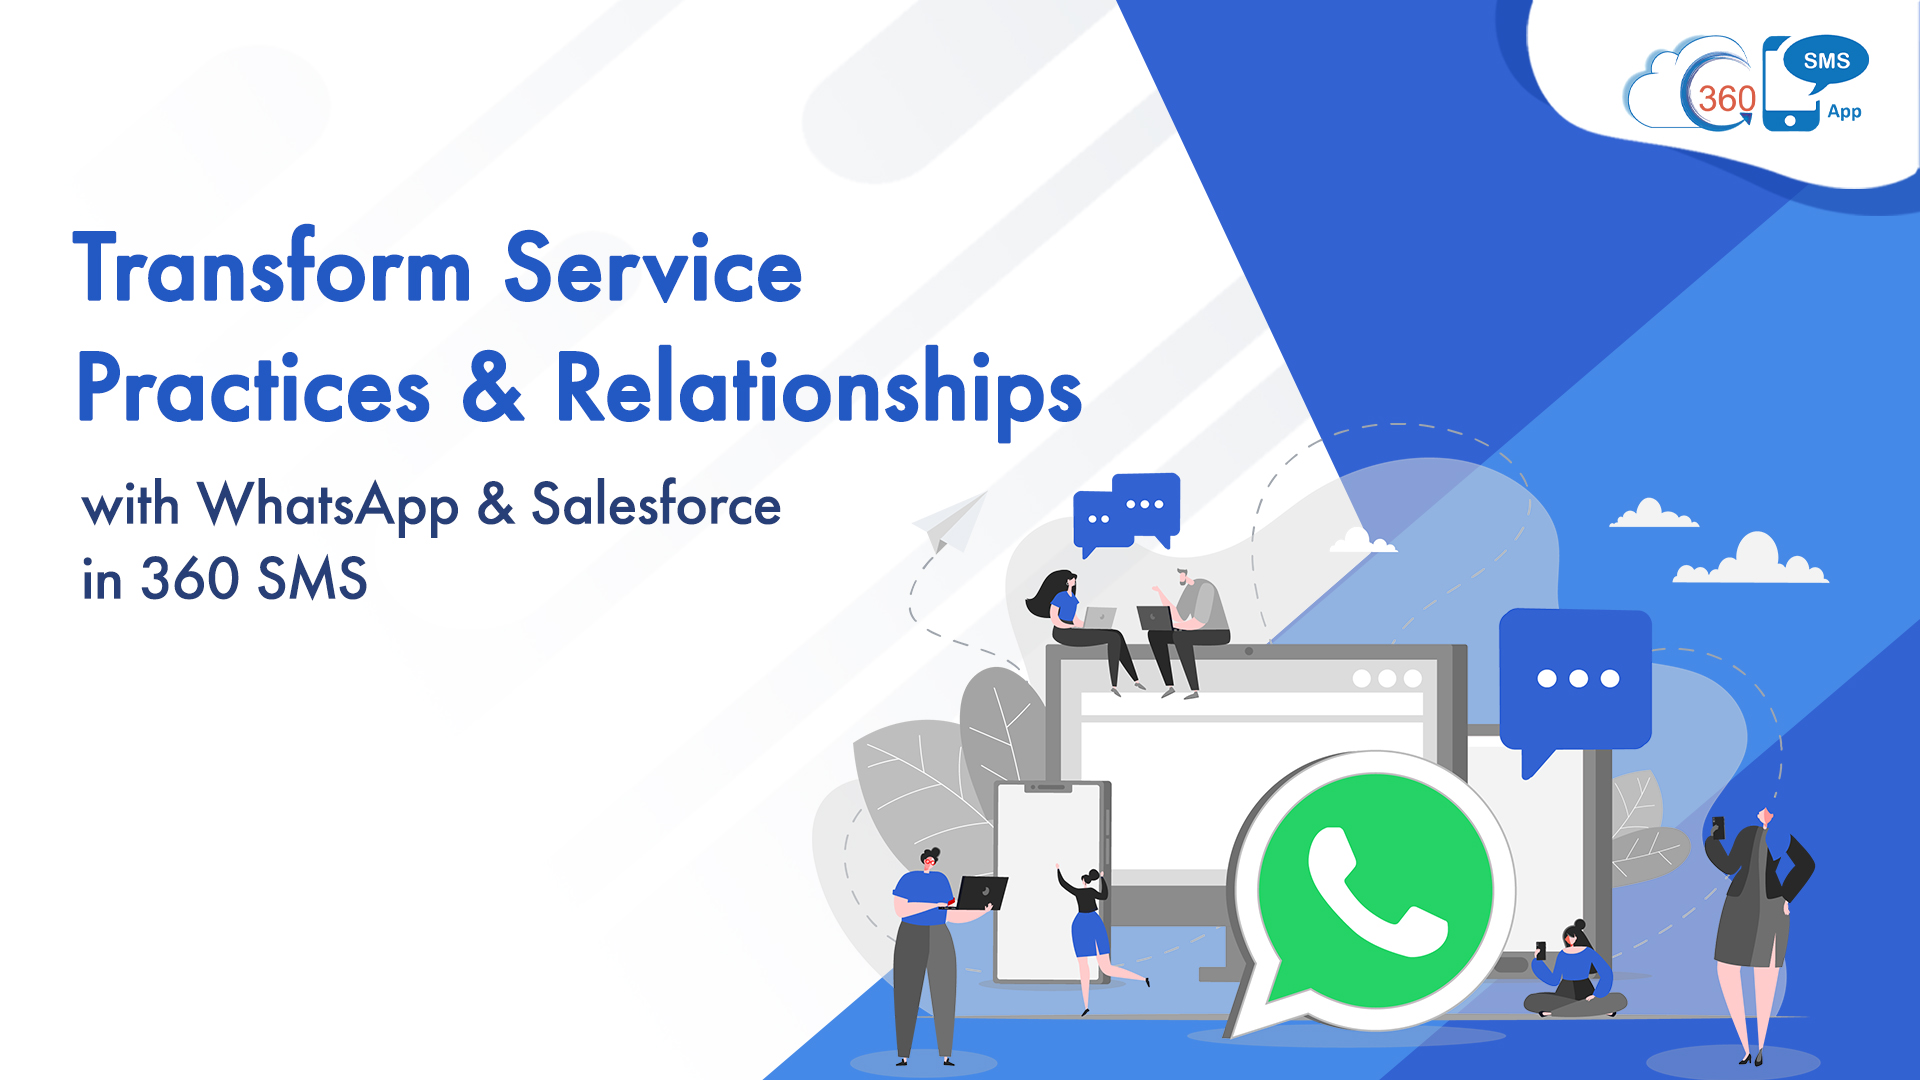 360 Sms App to transform service & relationships with Whatapp & Salesforce